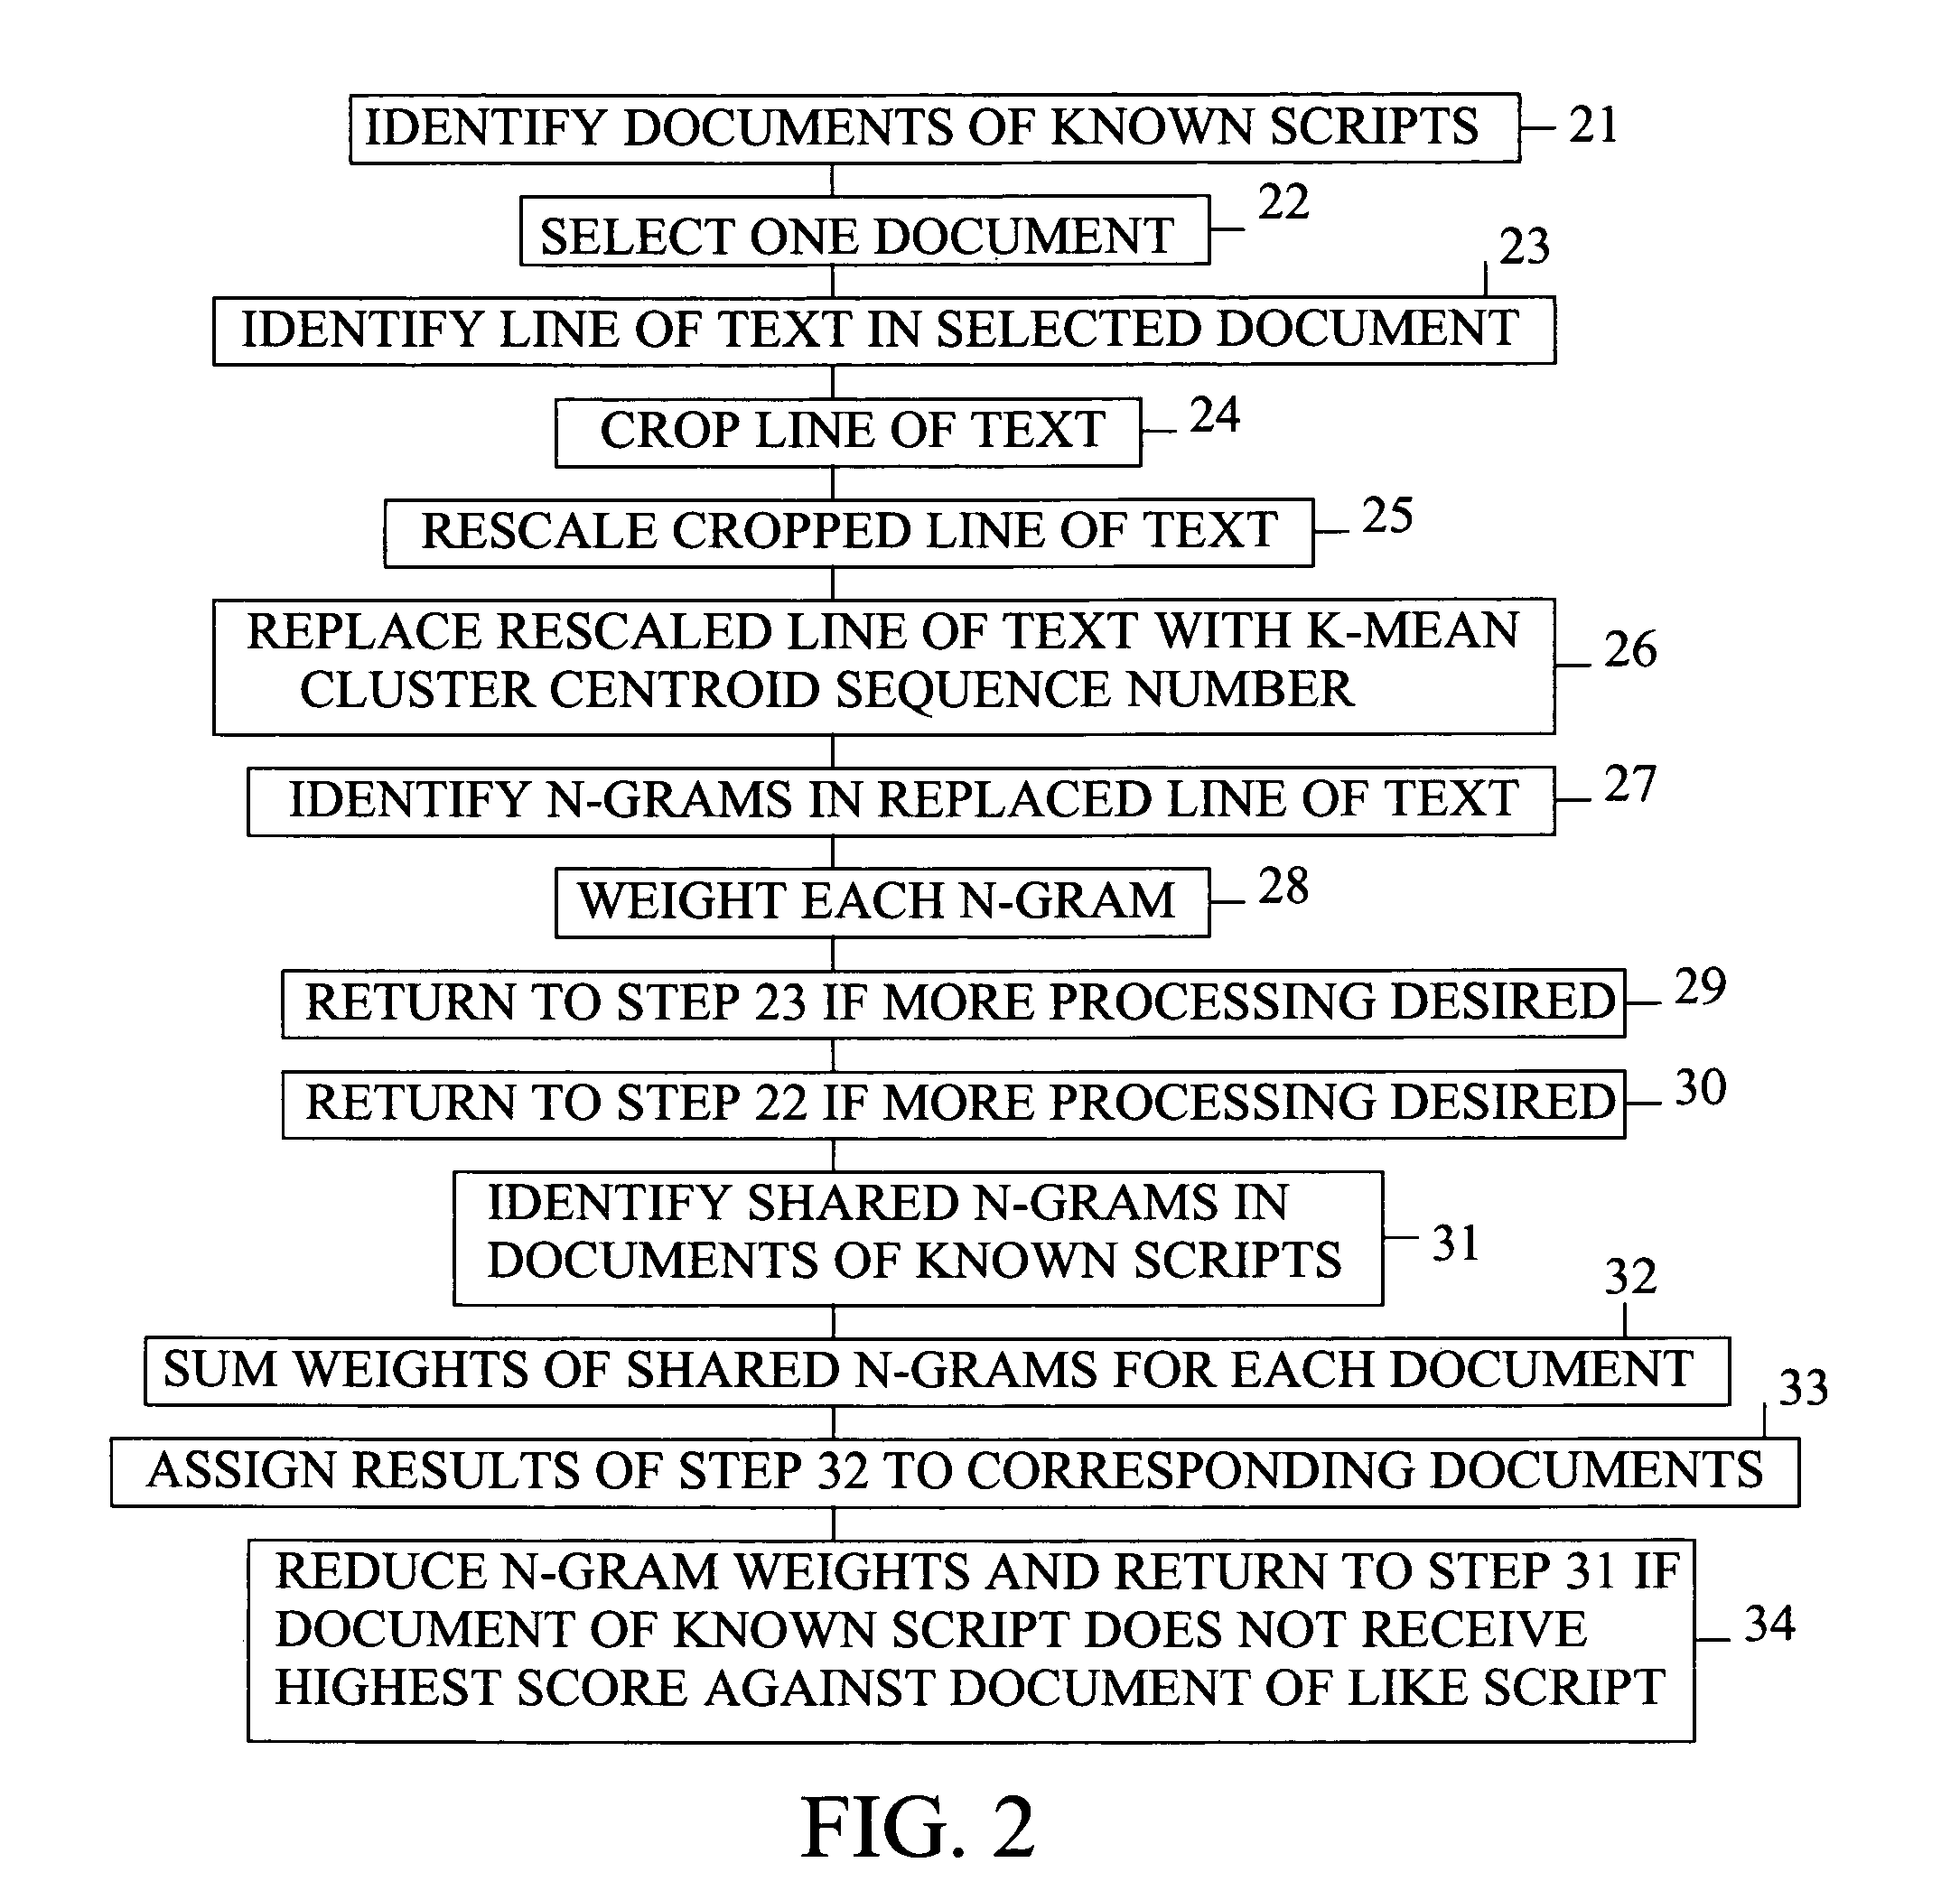 Method of identifying script of line of text